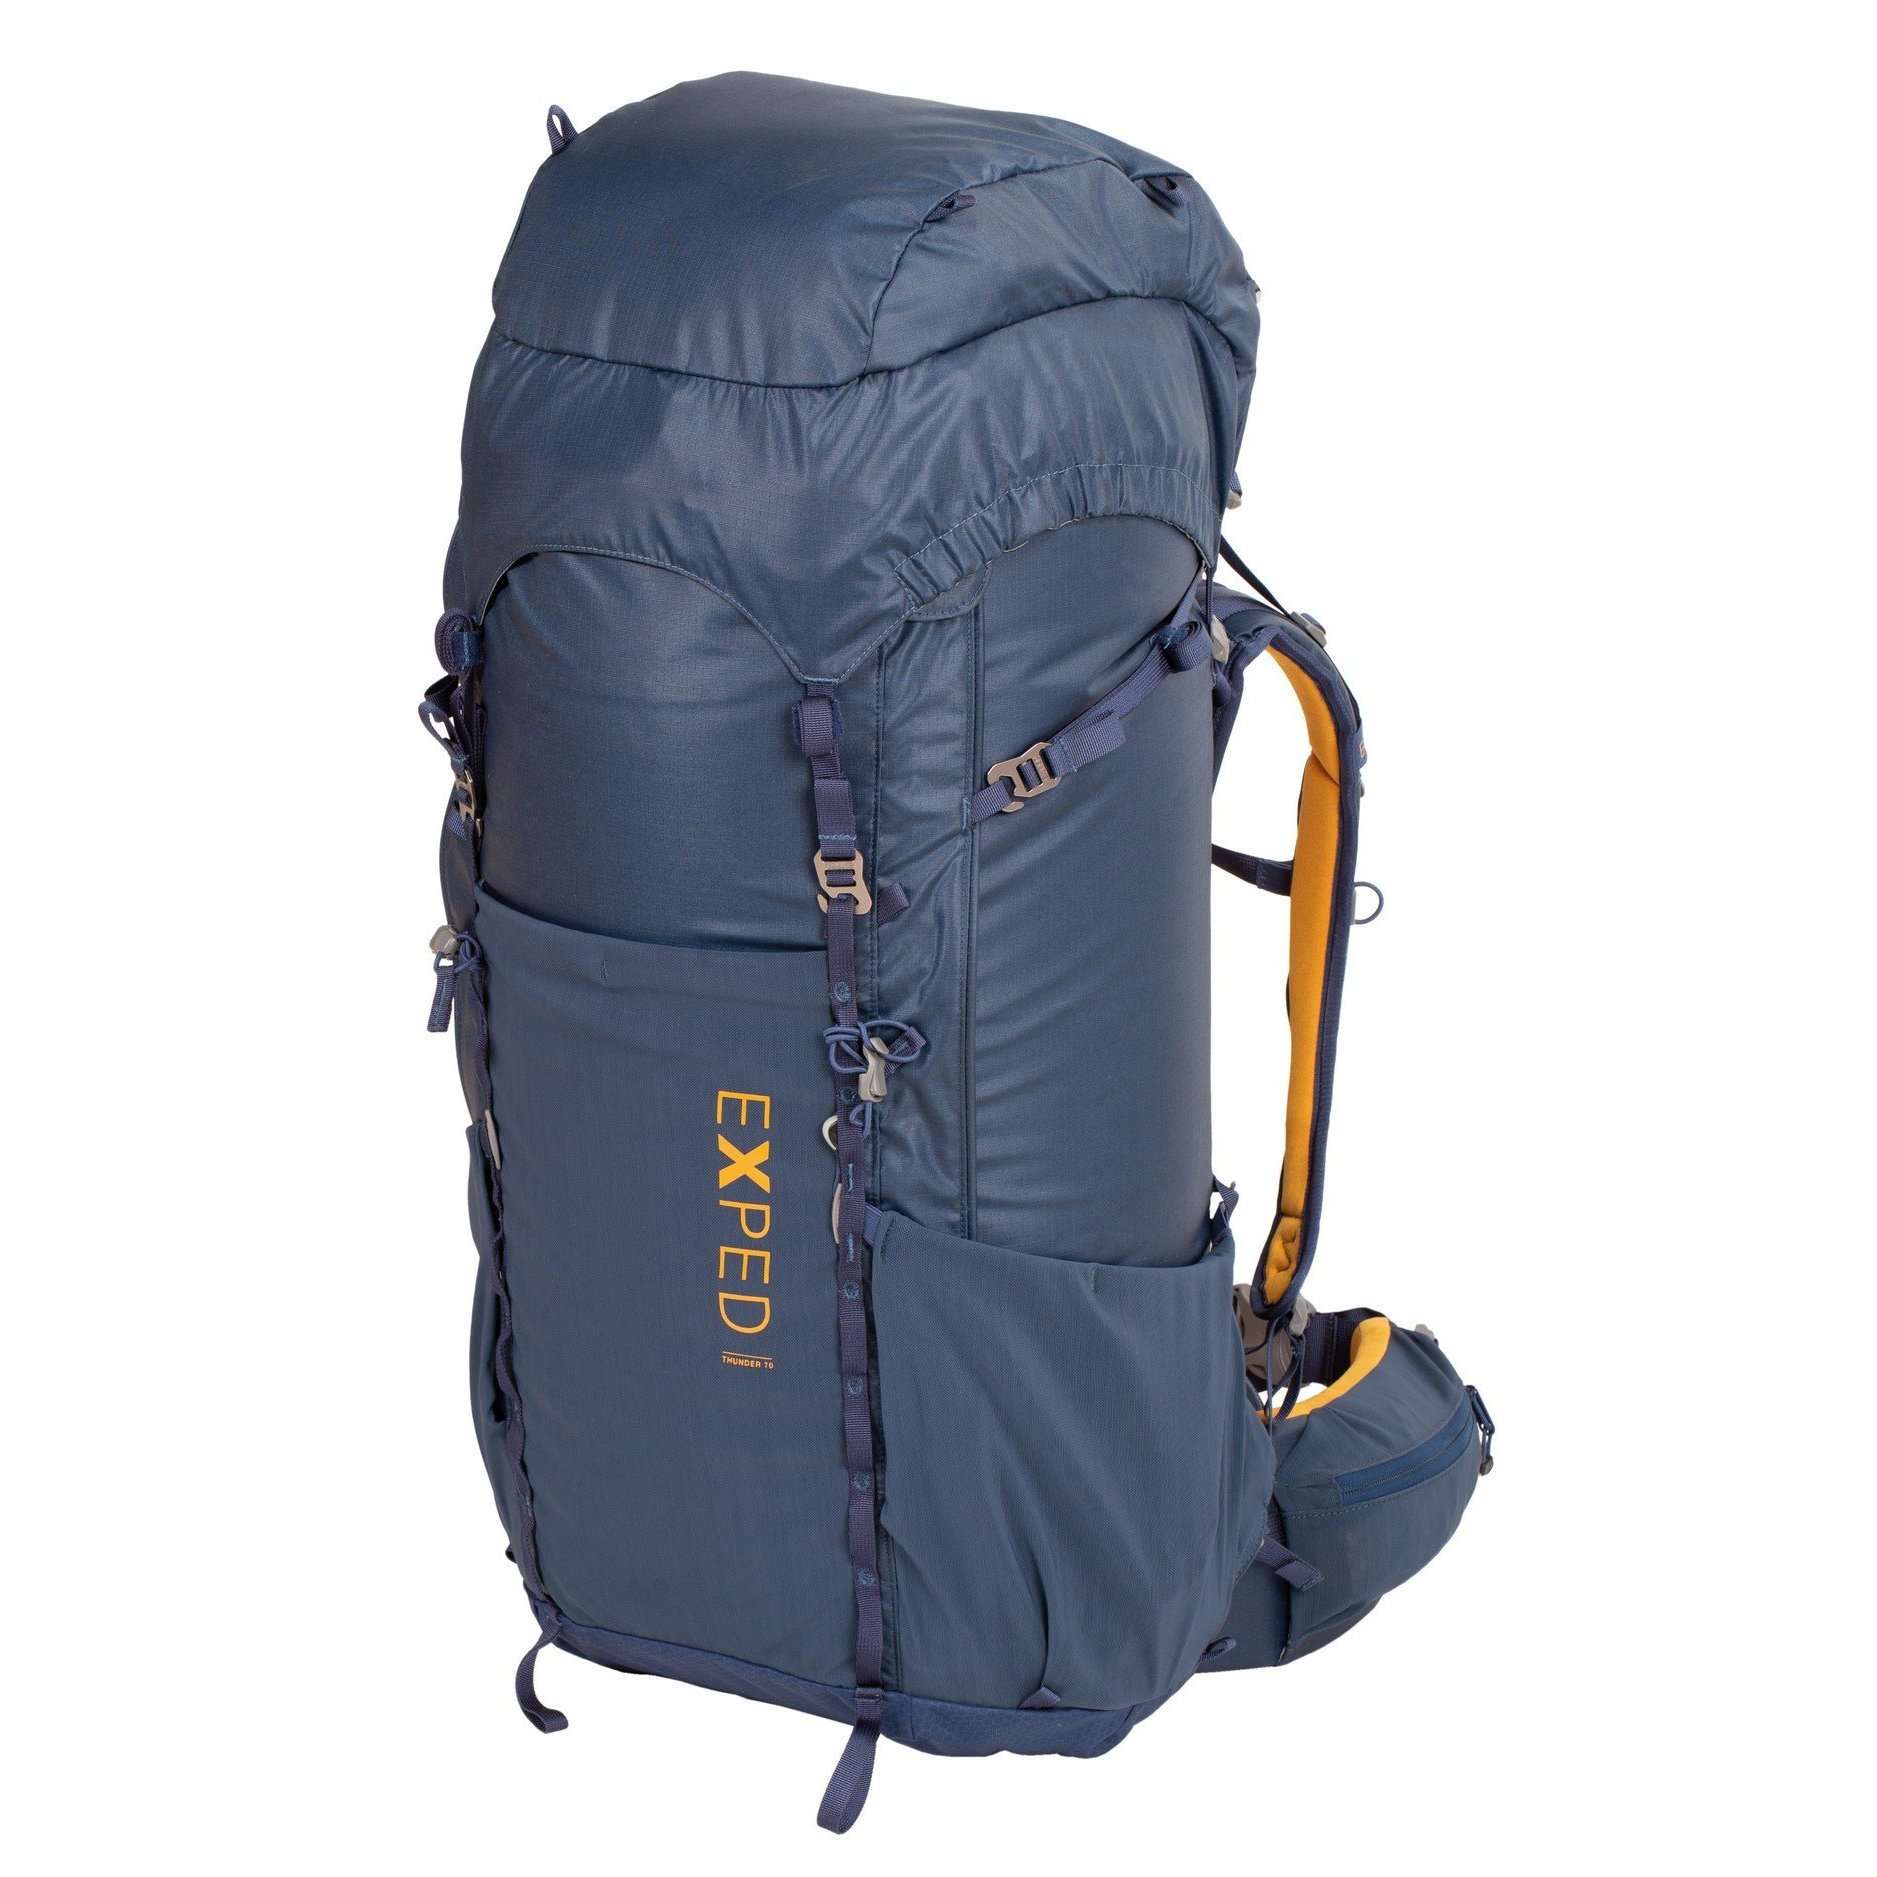 Exped, Exped Thunder 50 Litre (Women's), Rucksacks/Packs, Wylies Outdoor World,